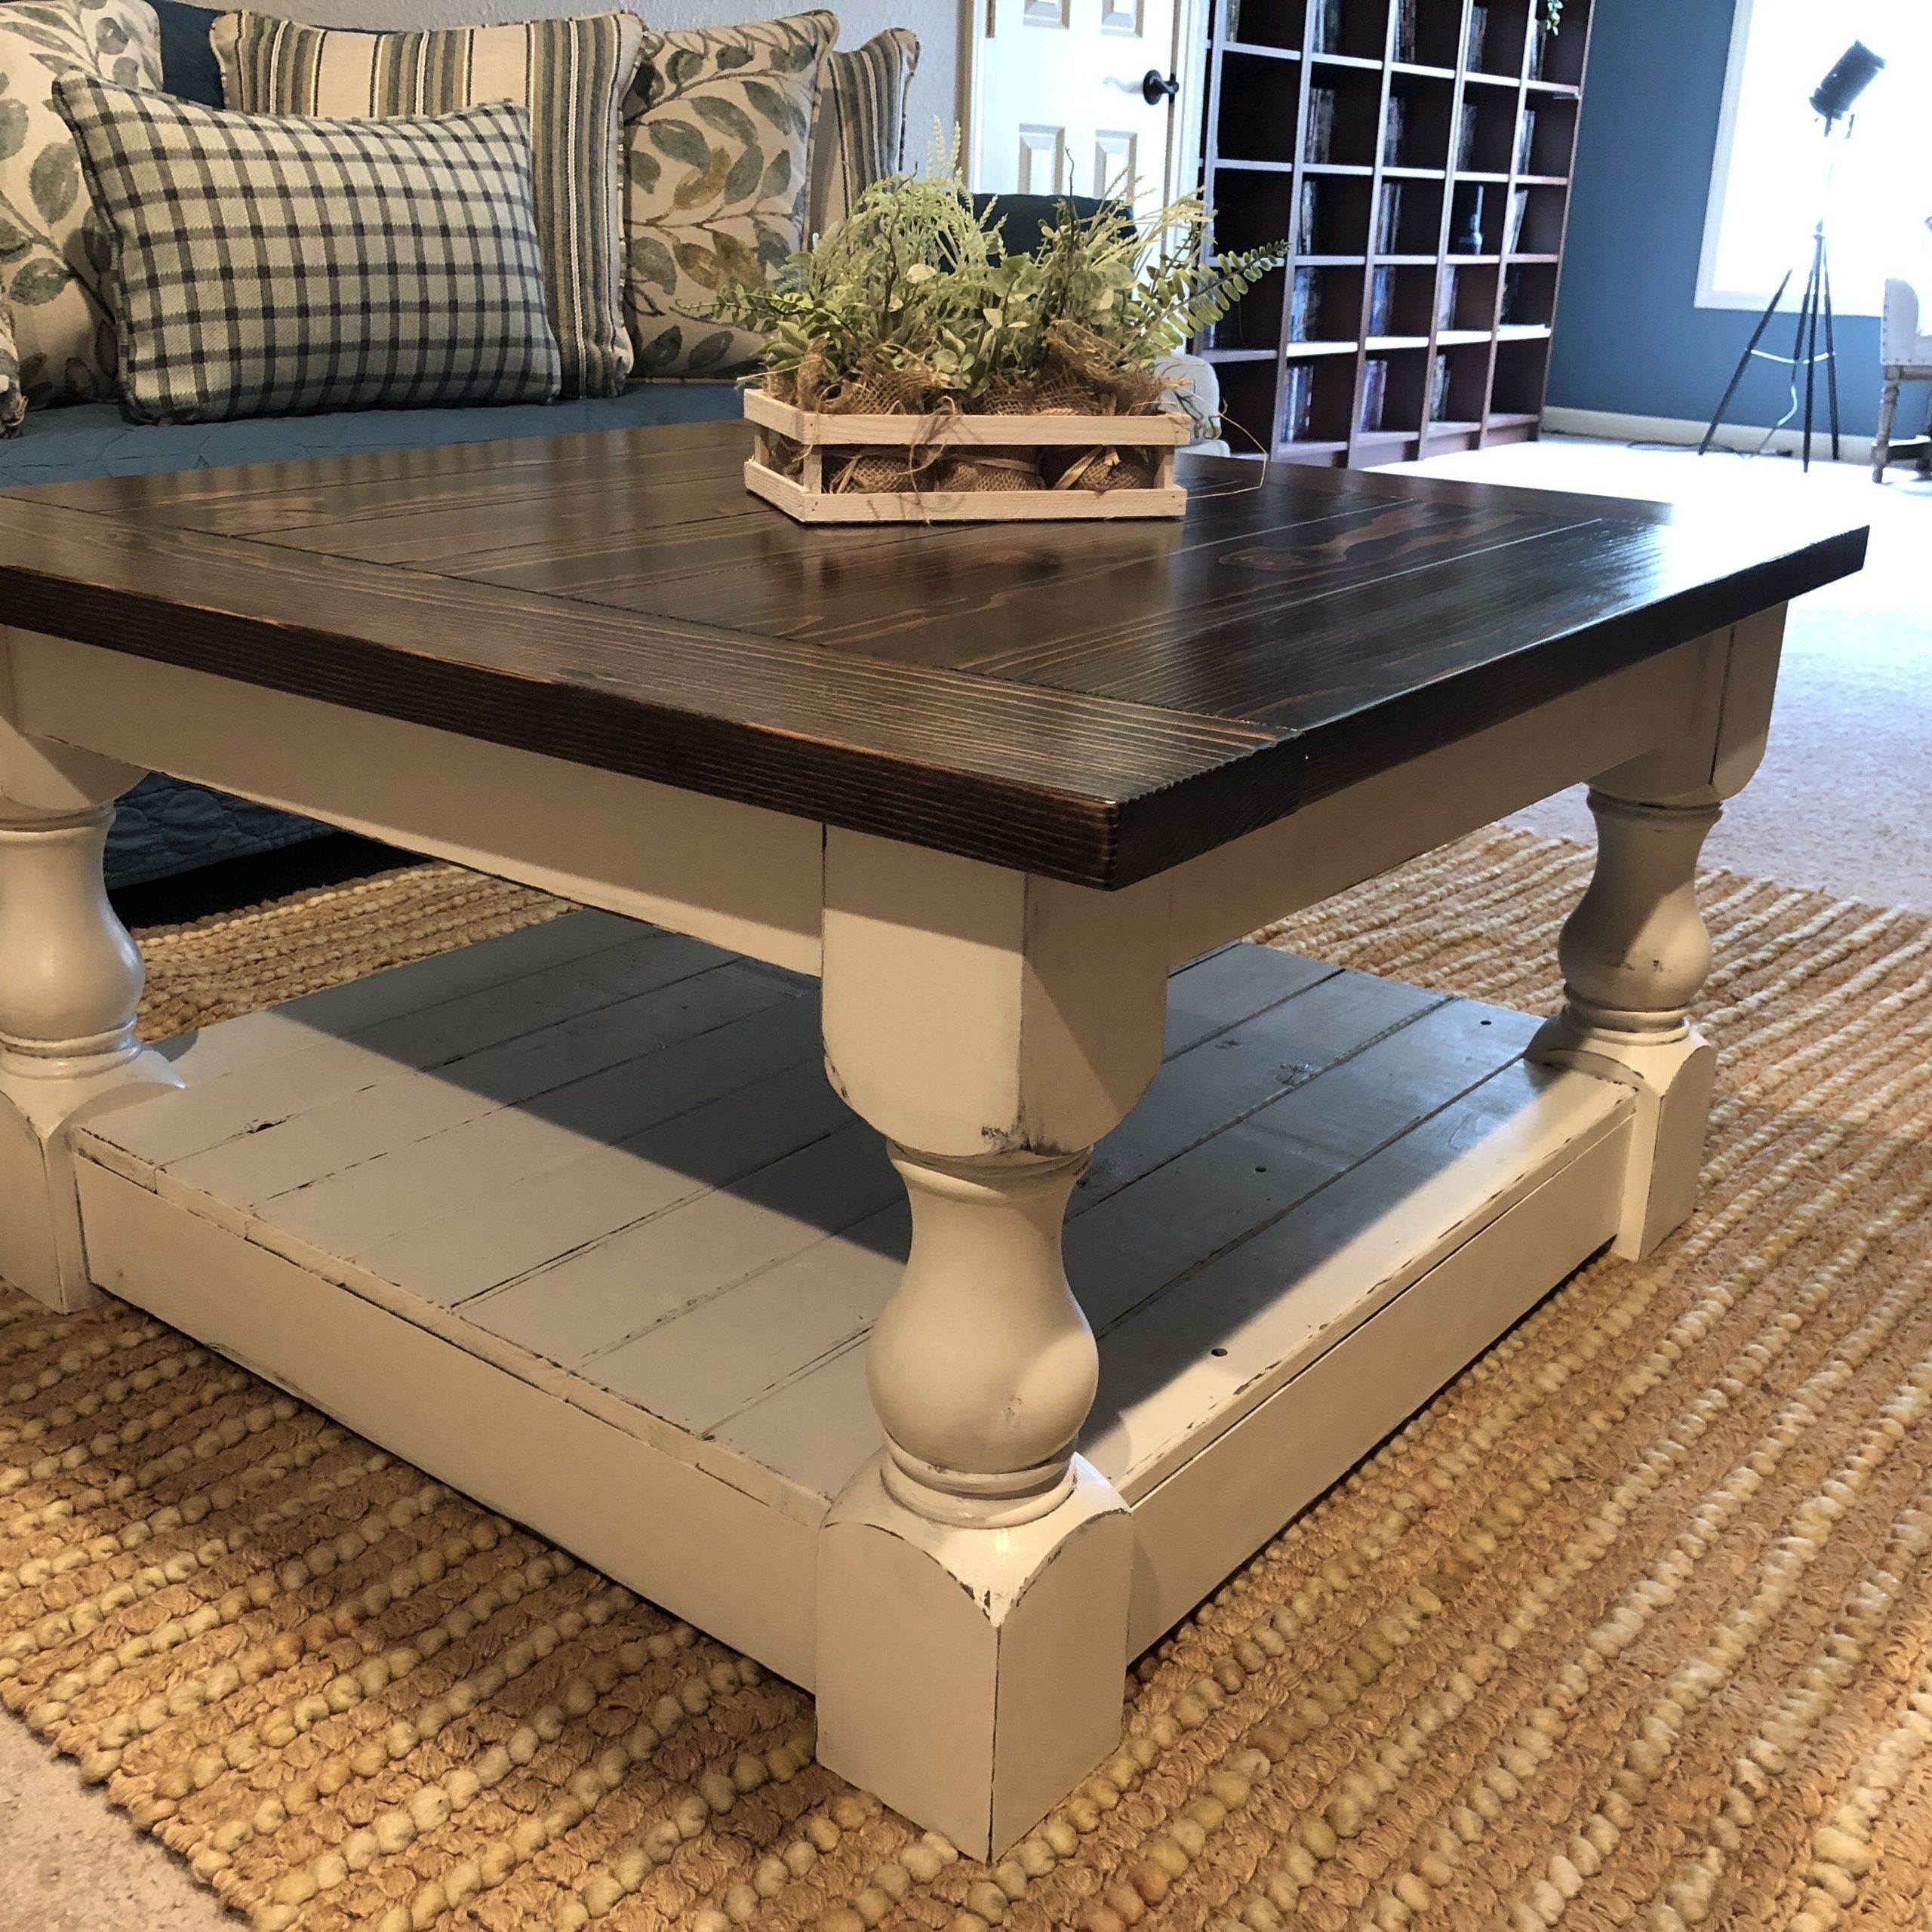 Rustic Square Coffee Tables: An Ideal Choice For Any Room – Coffee Inside Rustic Coffee Tables (View 3 of 20)